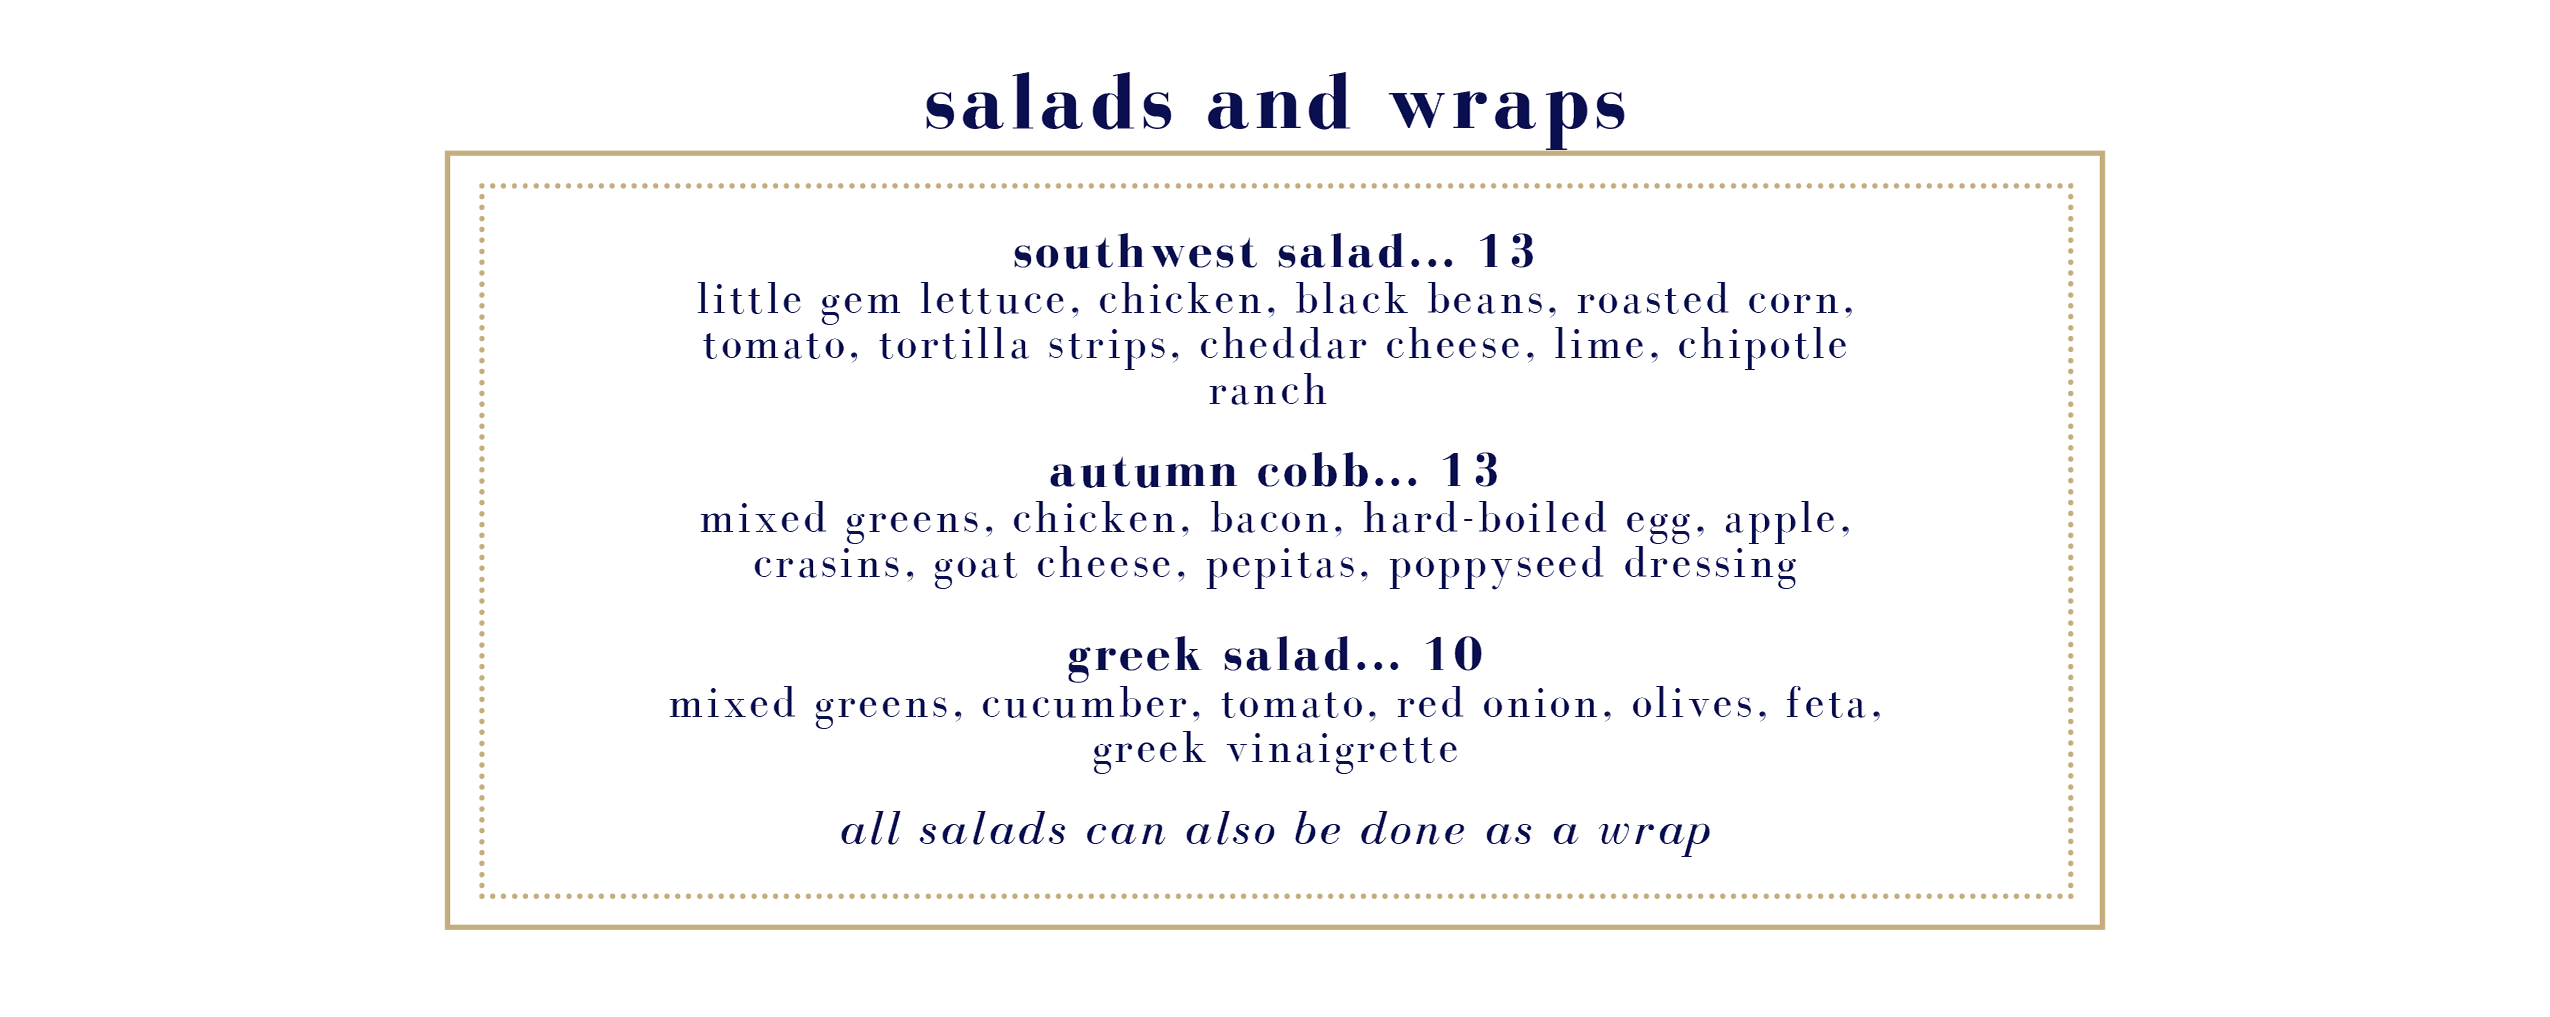 Salads and Wraps: southwest salad, autumn cobb, greek salad (all salads may be ordered as a wrap)